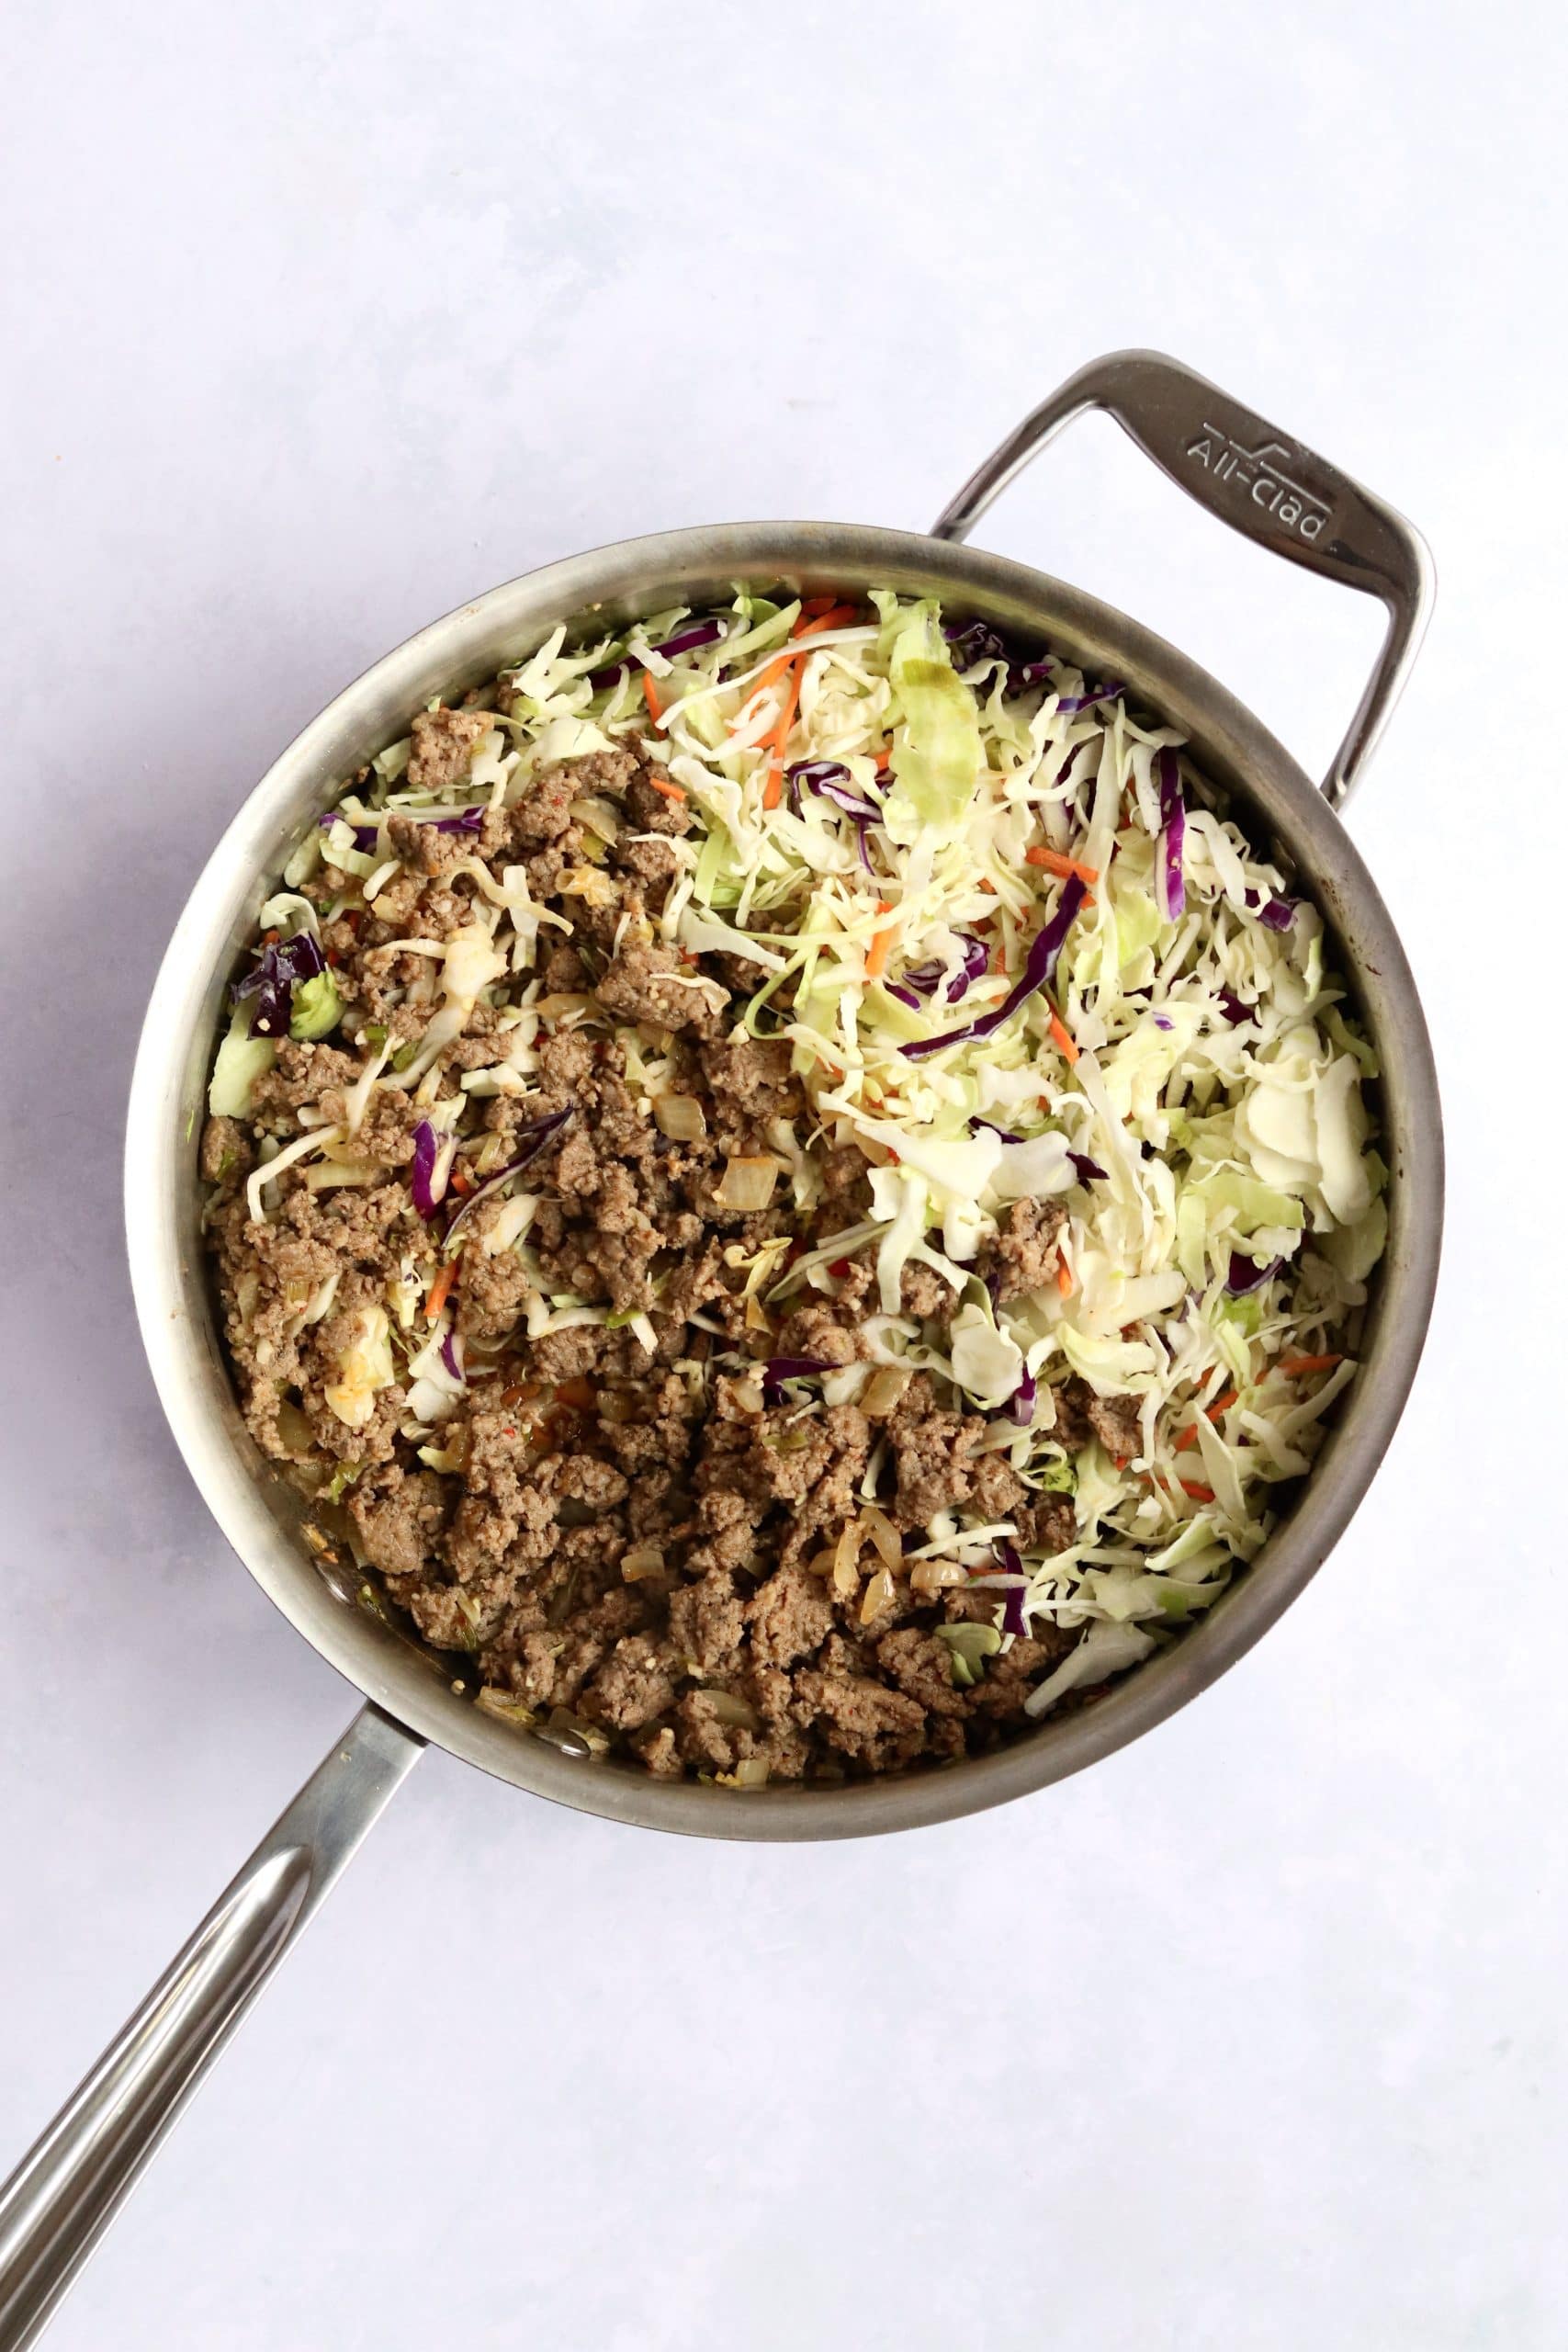 Ground pork and coleslaw mix in a skillet.